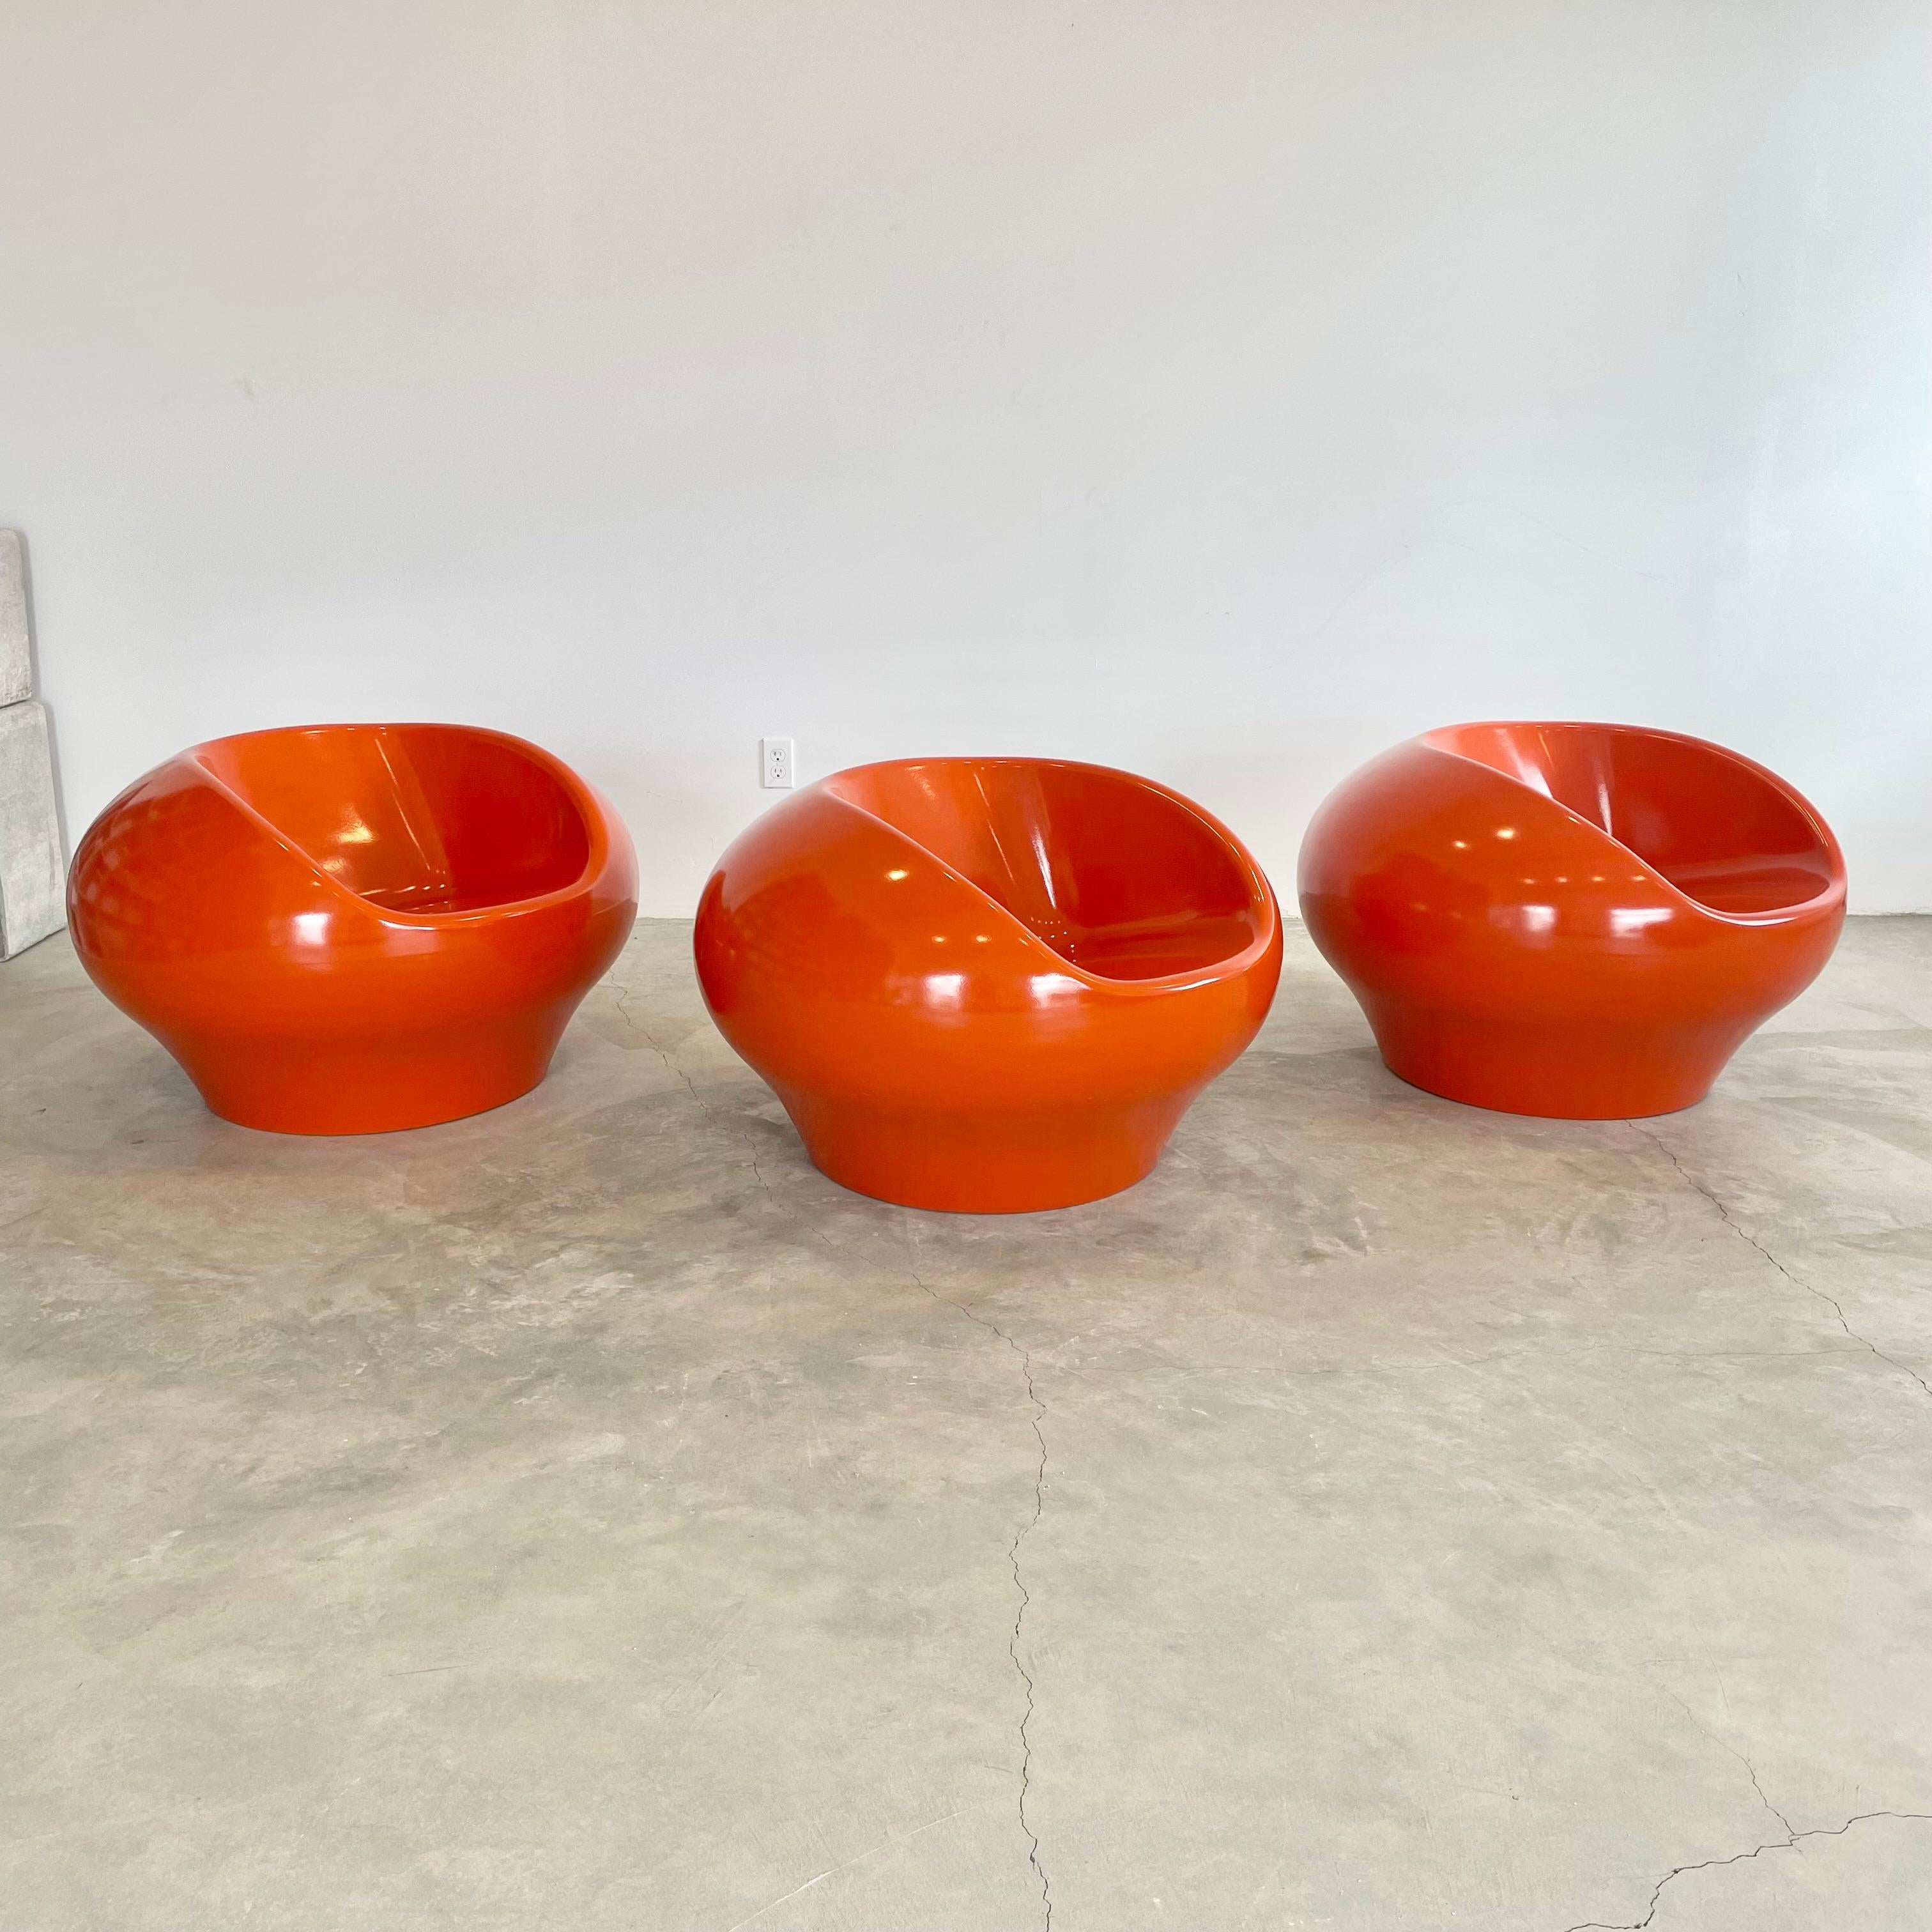 Finnish Set of 3 Prototype Fiberglass Chairs in the Style of Eero Aarnio, 1970s, Finland For Sale